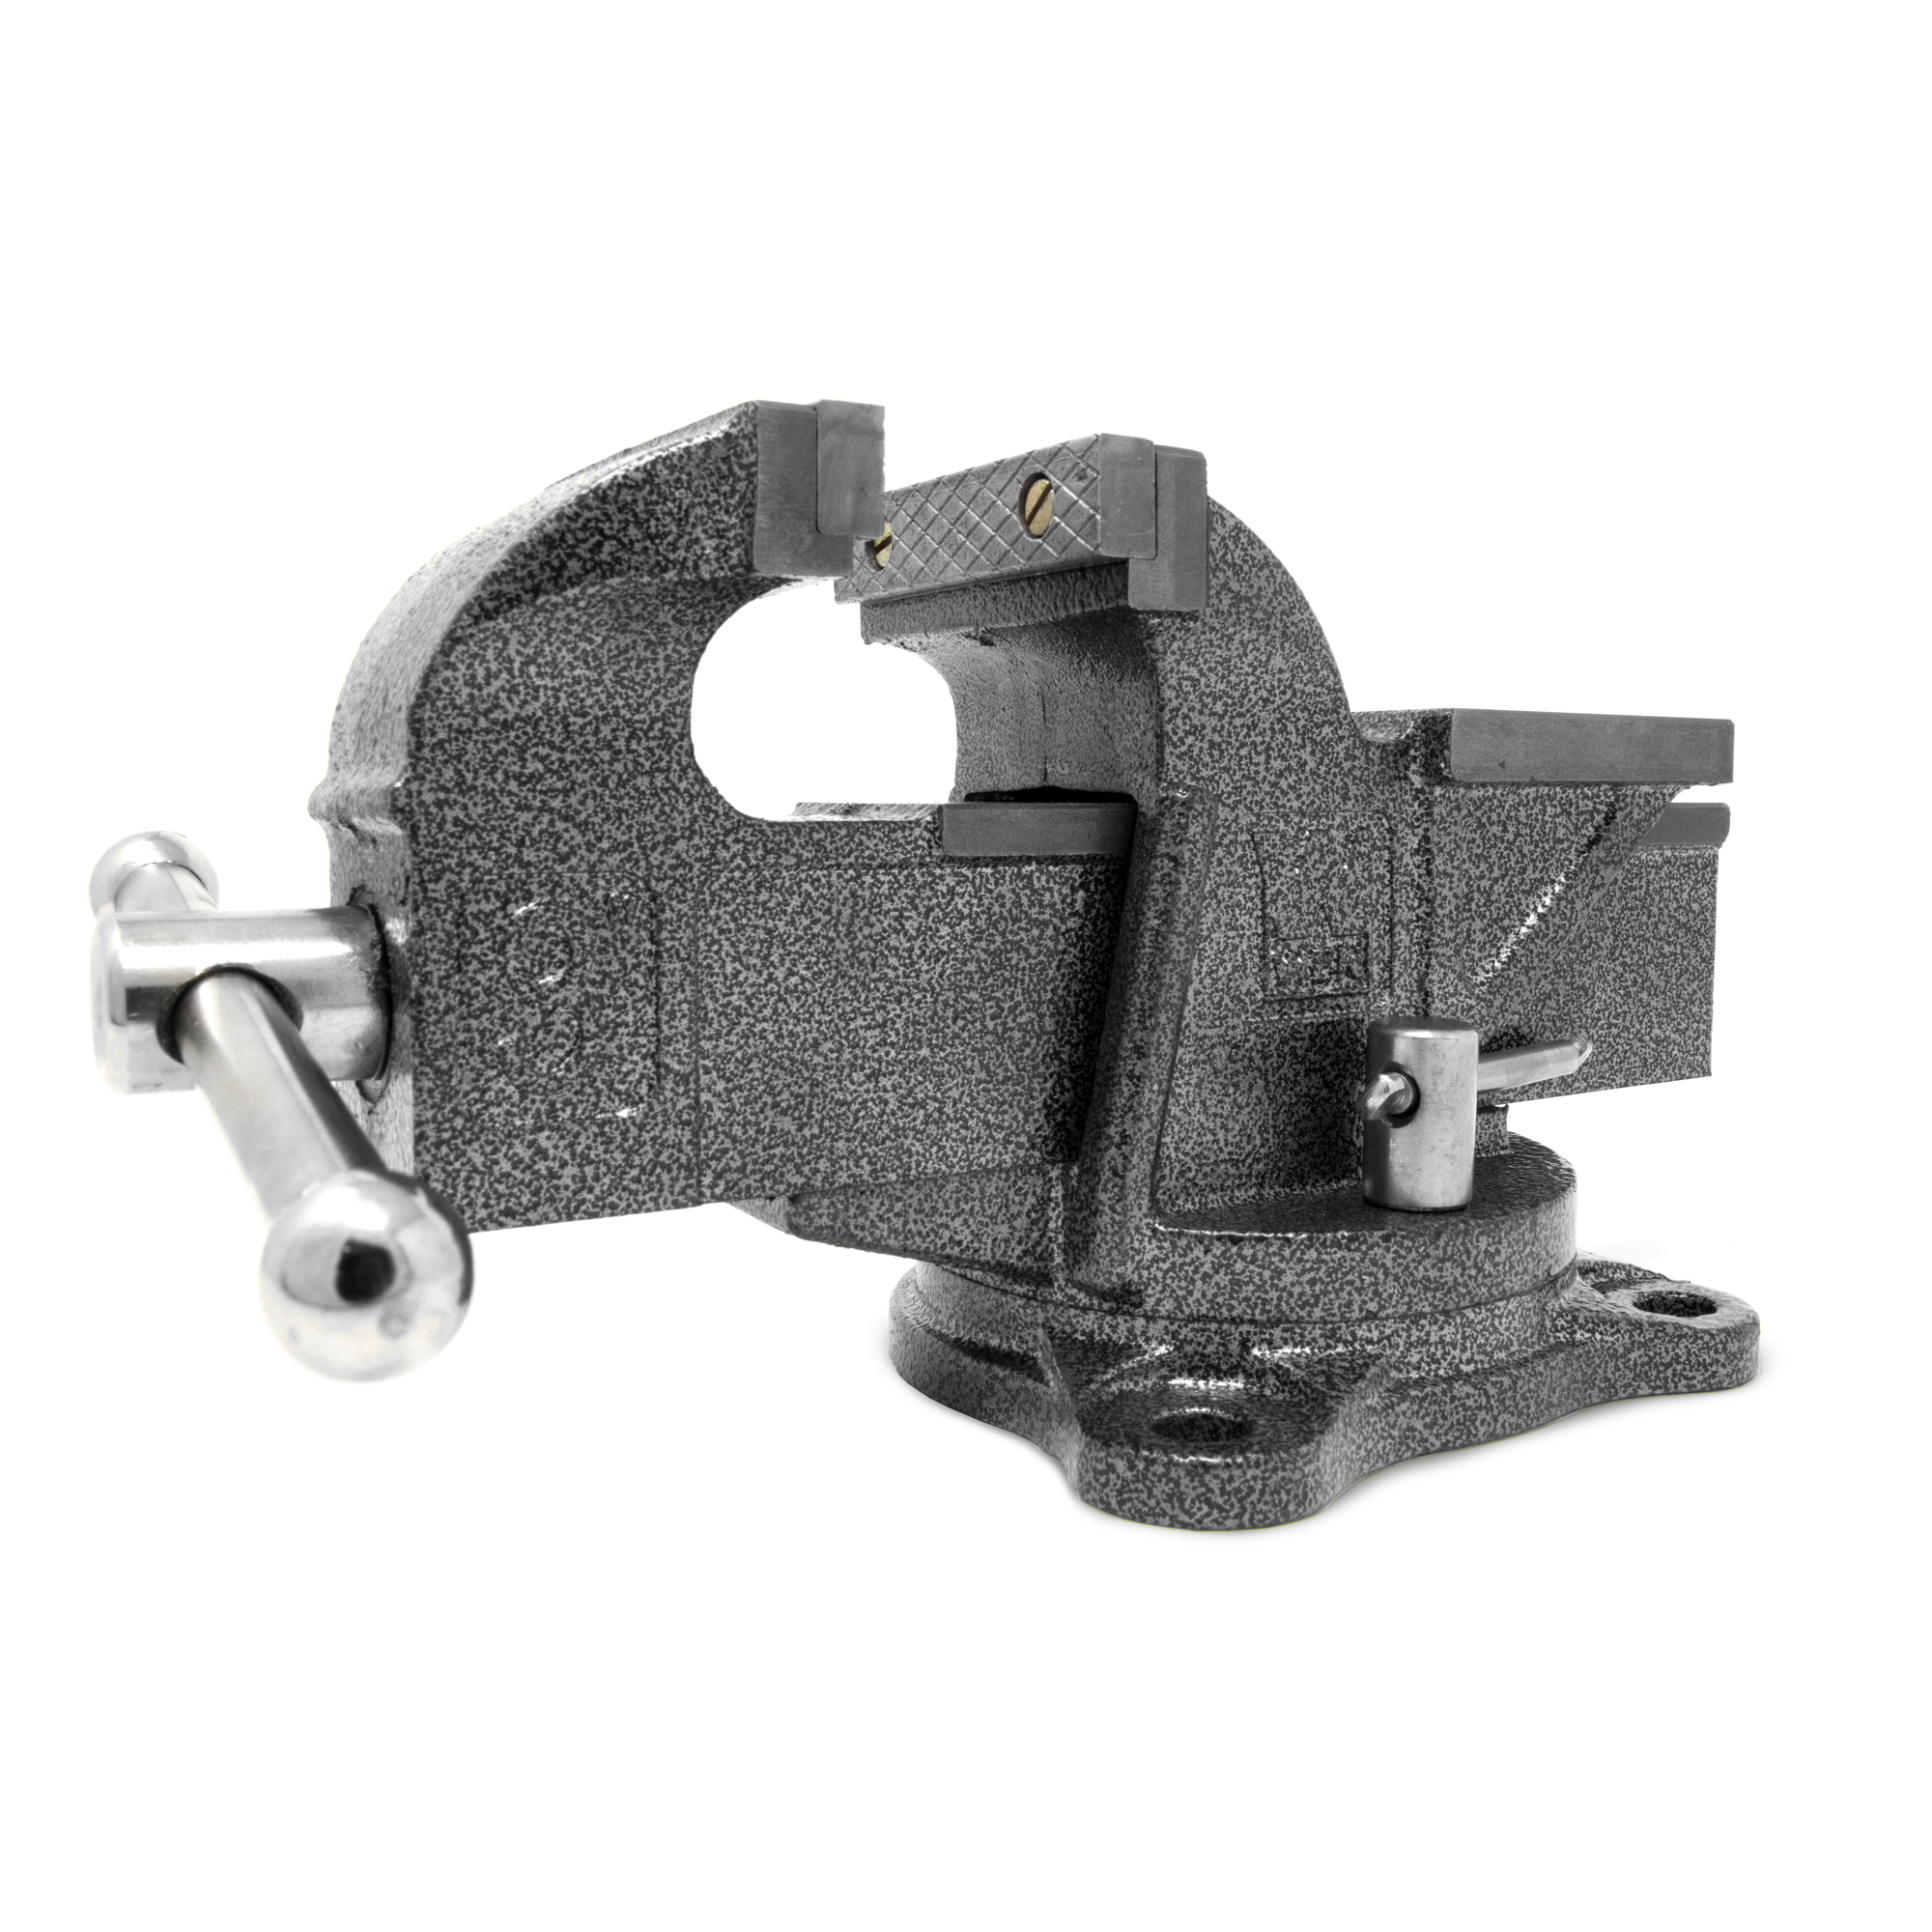 WEN, 3Inch Cast Iron Bench Vise with Swivel Base, Jaw Width 3 in, Jaw Capacity 3.25 in, Material Cast Iron, Model BV453